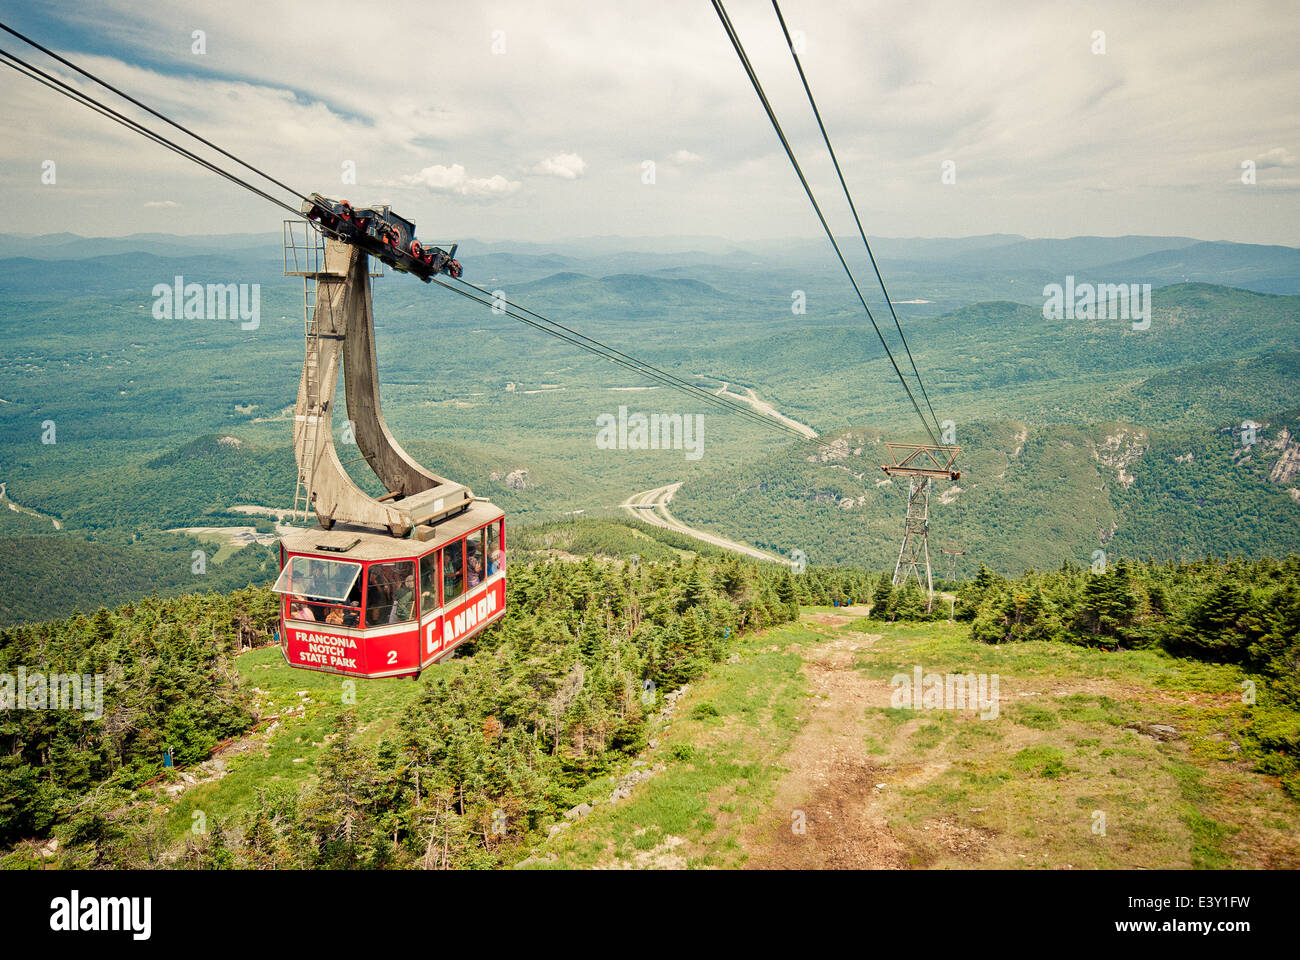 The view of aerial tramway in the White Mountains, New Hampshire. Stock Photo